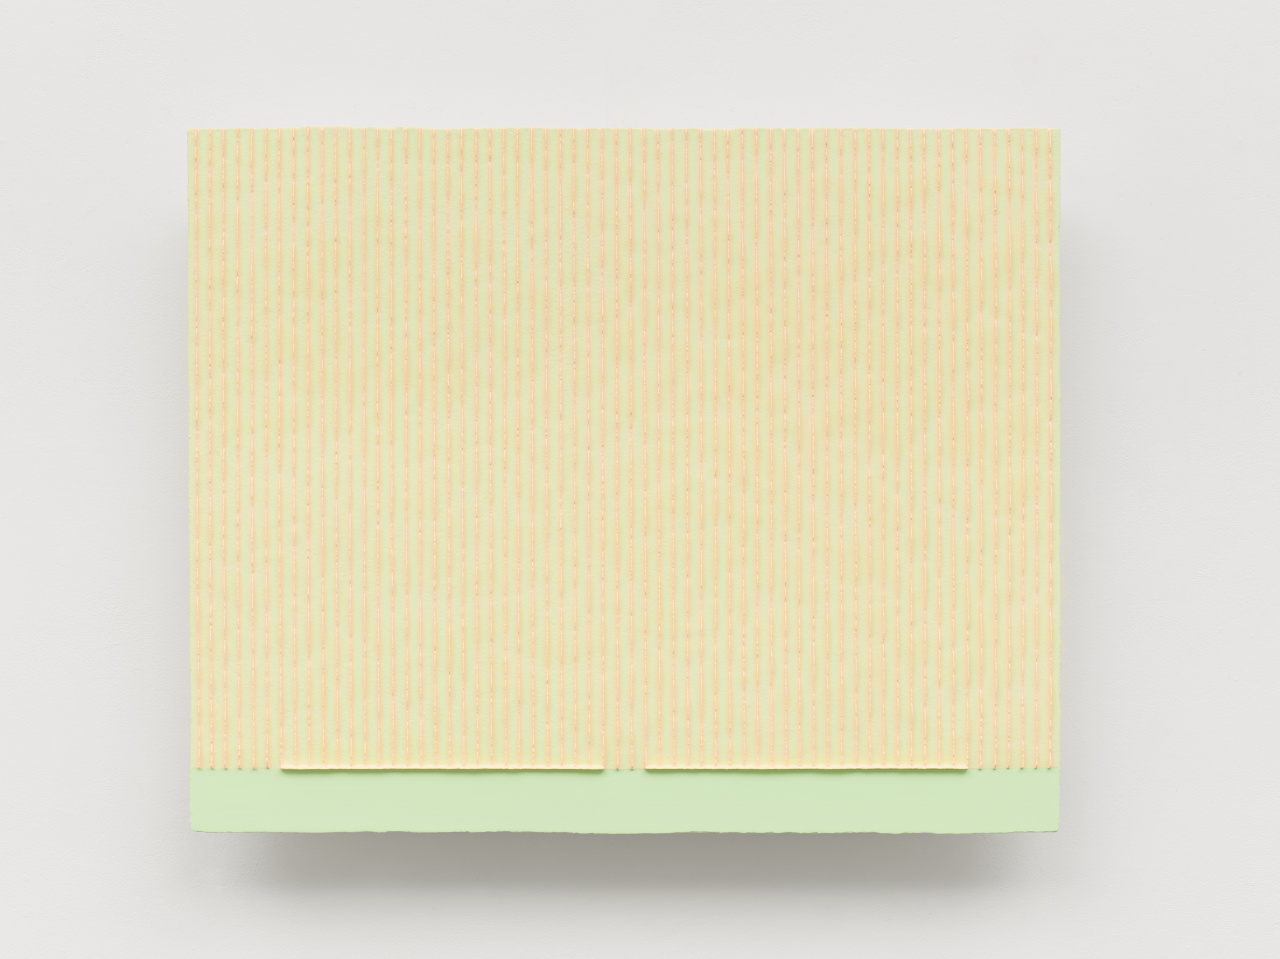 “Ecriture No 220125” by Park Seo-bo (courtesy of the artist, White Cube)